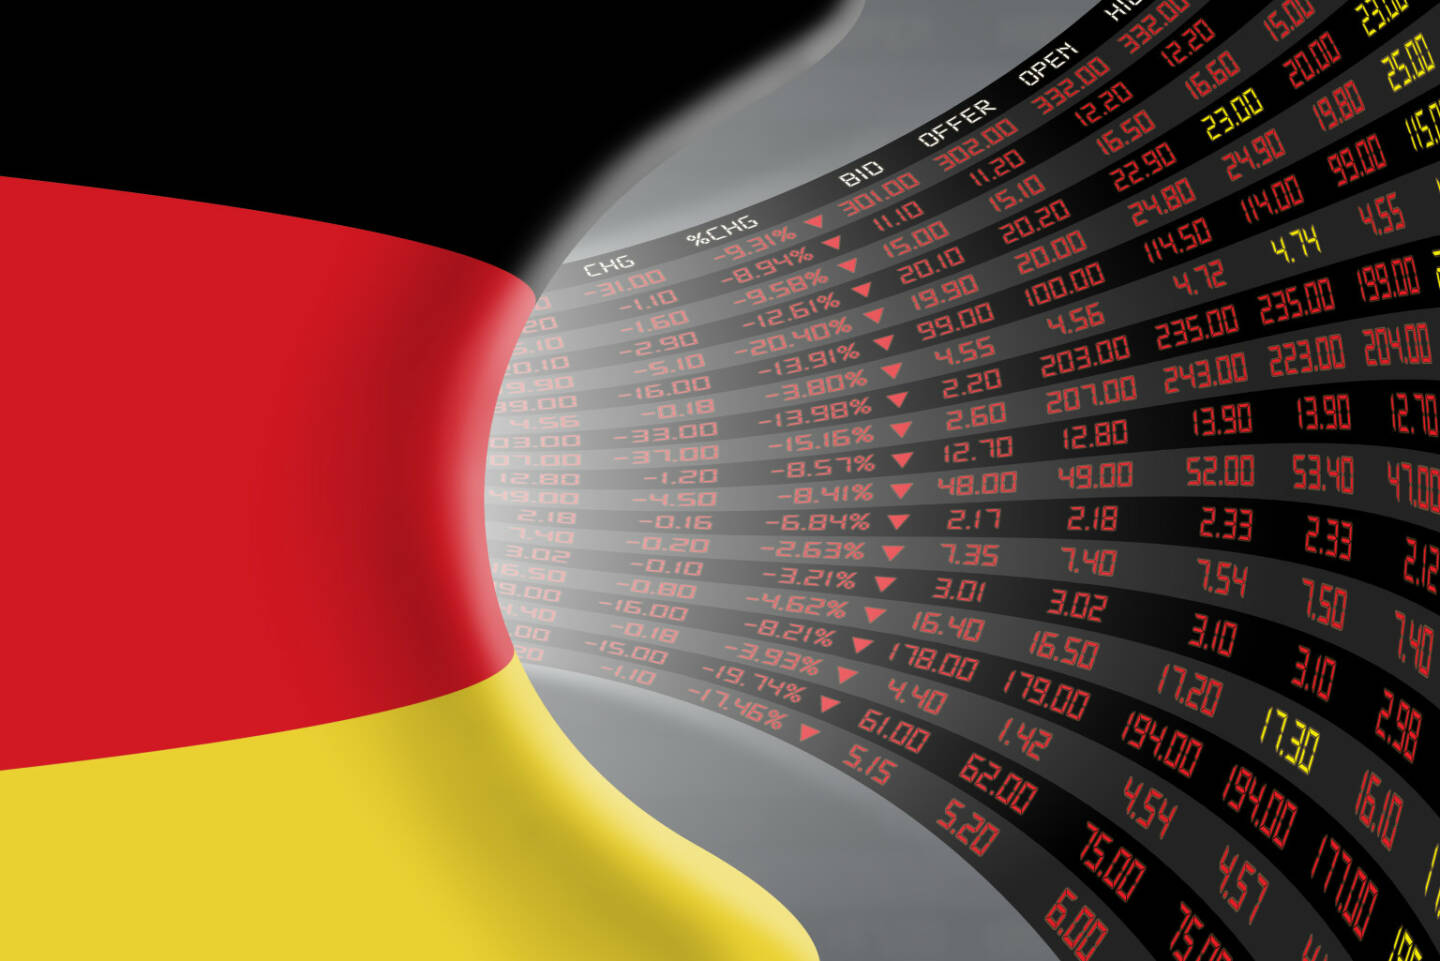 DAX, Kurszettel, rot http://www.shutterstock.com/de/pic-361977824/stock-photo-national-flag-of-germany-with-a-large-display-of-daily-stock-market-price-and-quotations-during.html